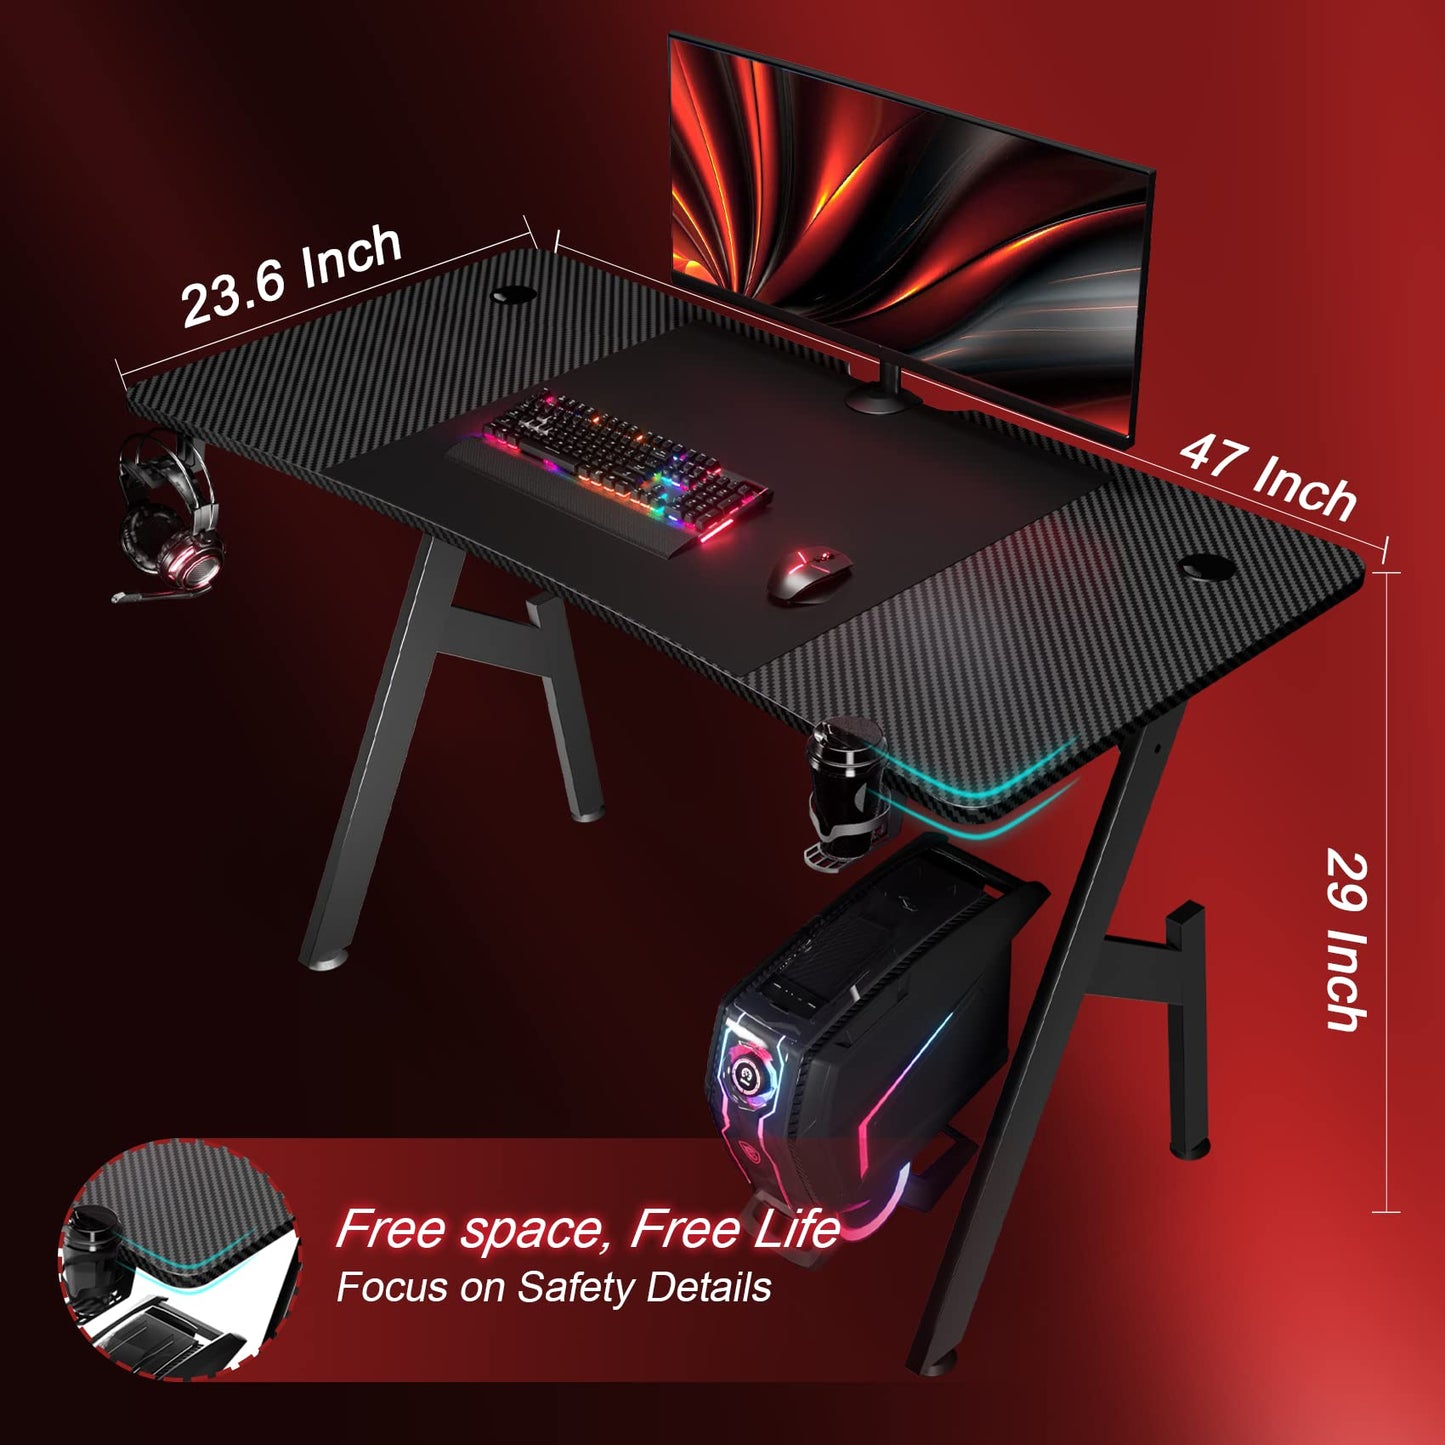 HLDIRECT 47 Inch Gaming Desk with Carbon Fibre Surface Large Computer Desk Gaming Table Ergonomic Pc Gaming Workstation Home Office Desks with Cup Holder & Headphone Hook